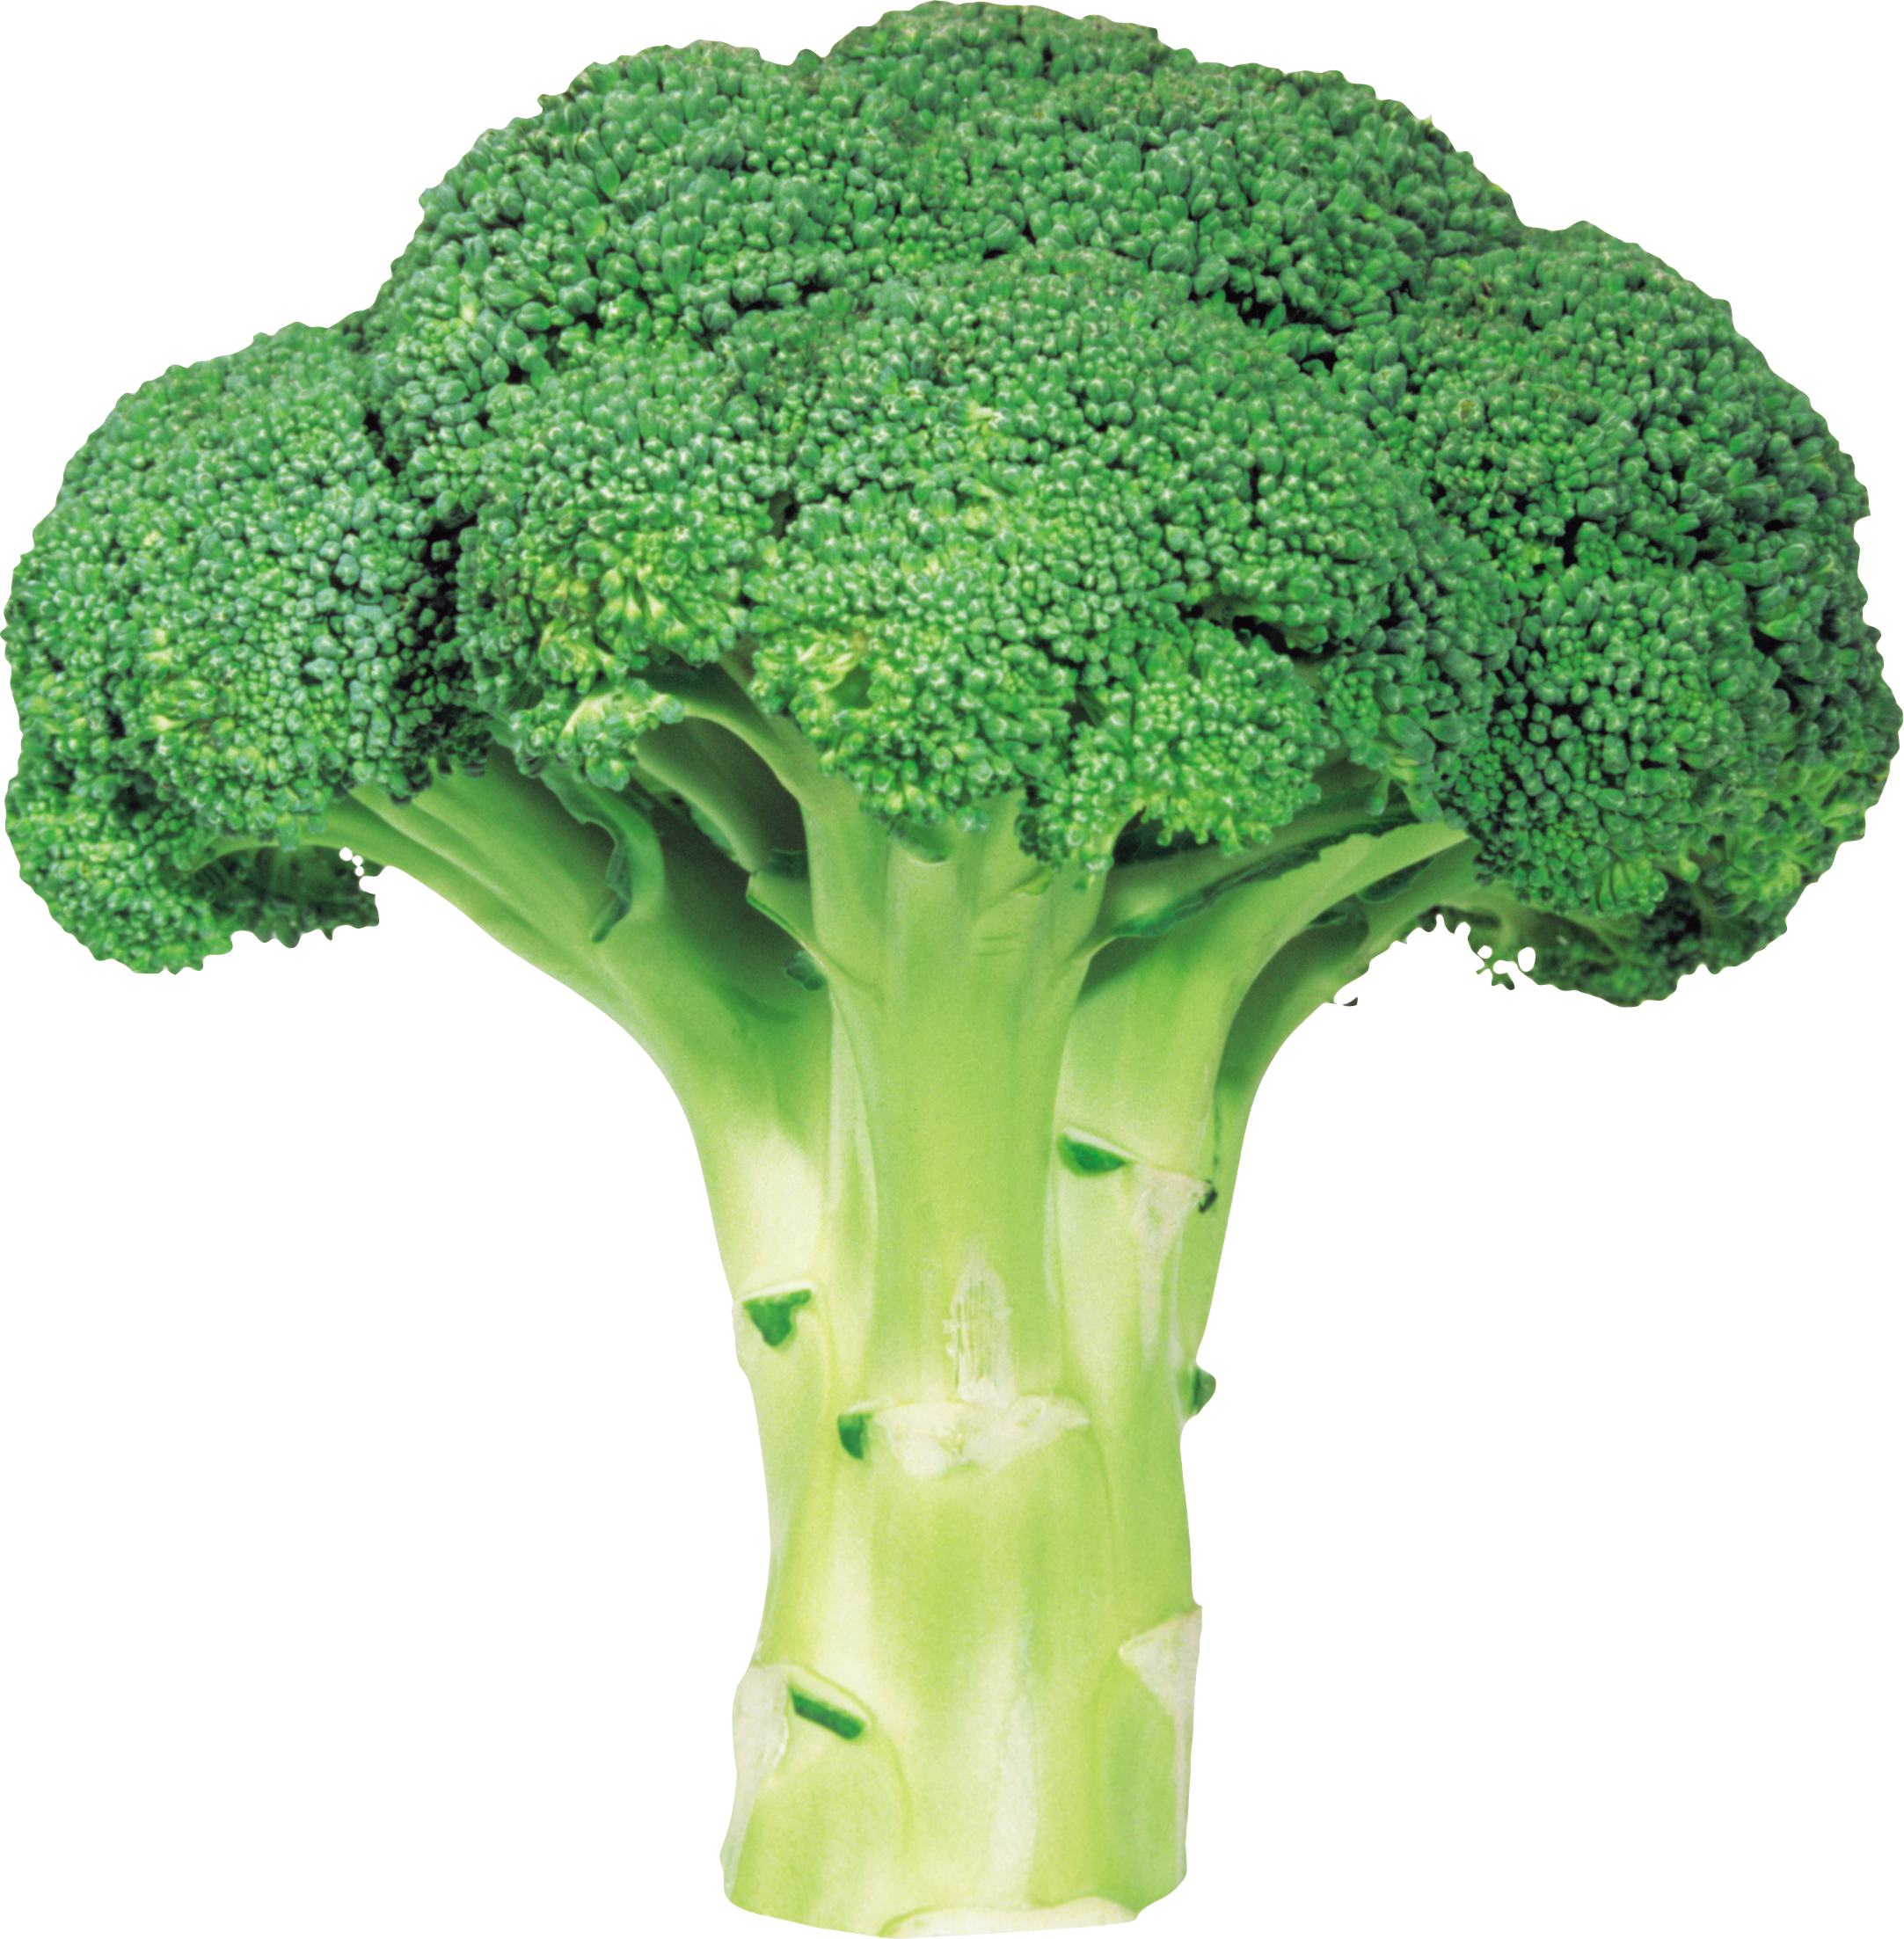 Download Png Image  Broccoli Png Image With Transparent Background